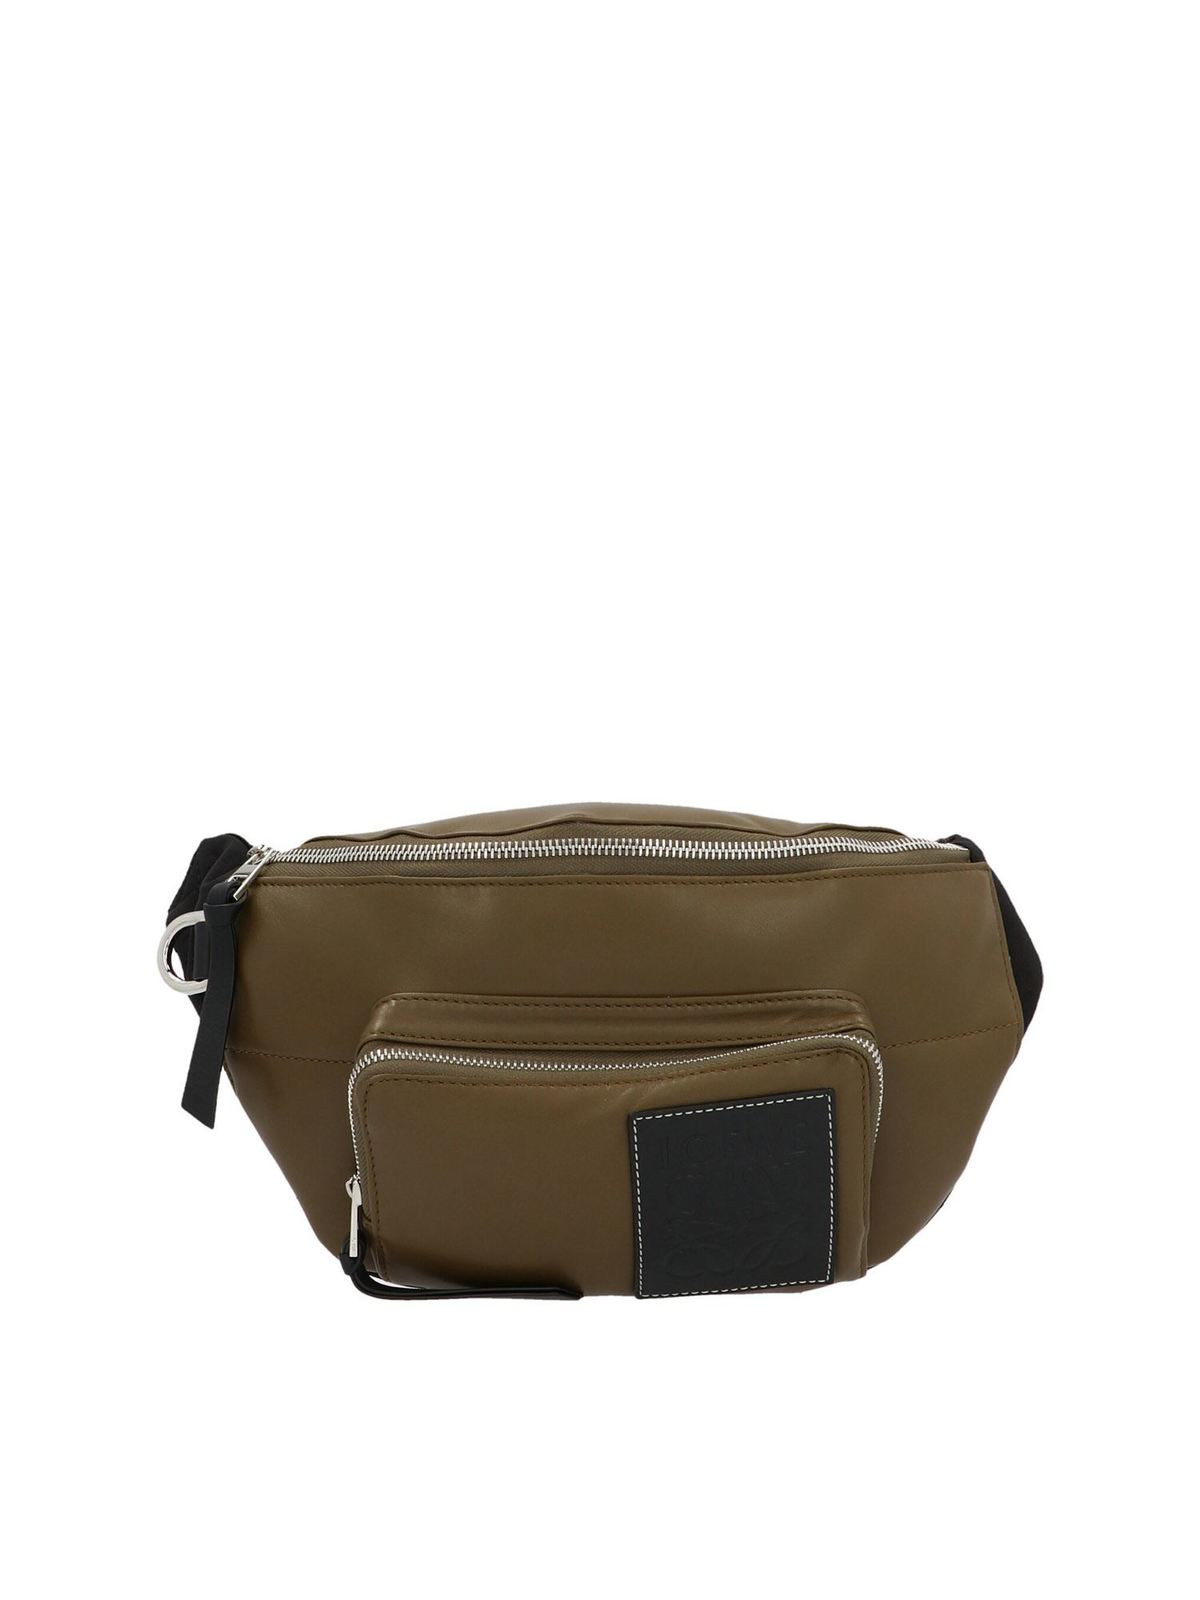 Loewe - Padded leather fanny pack 